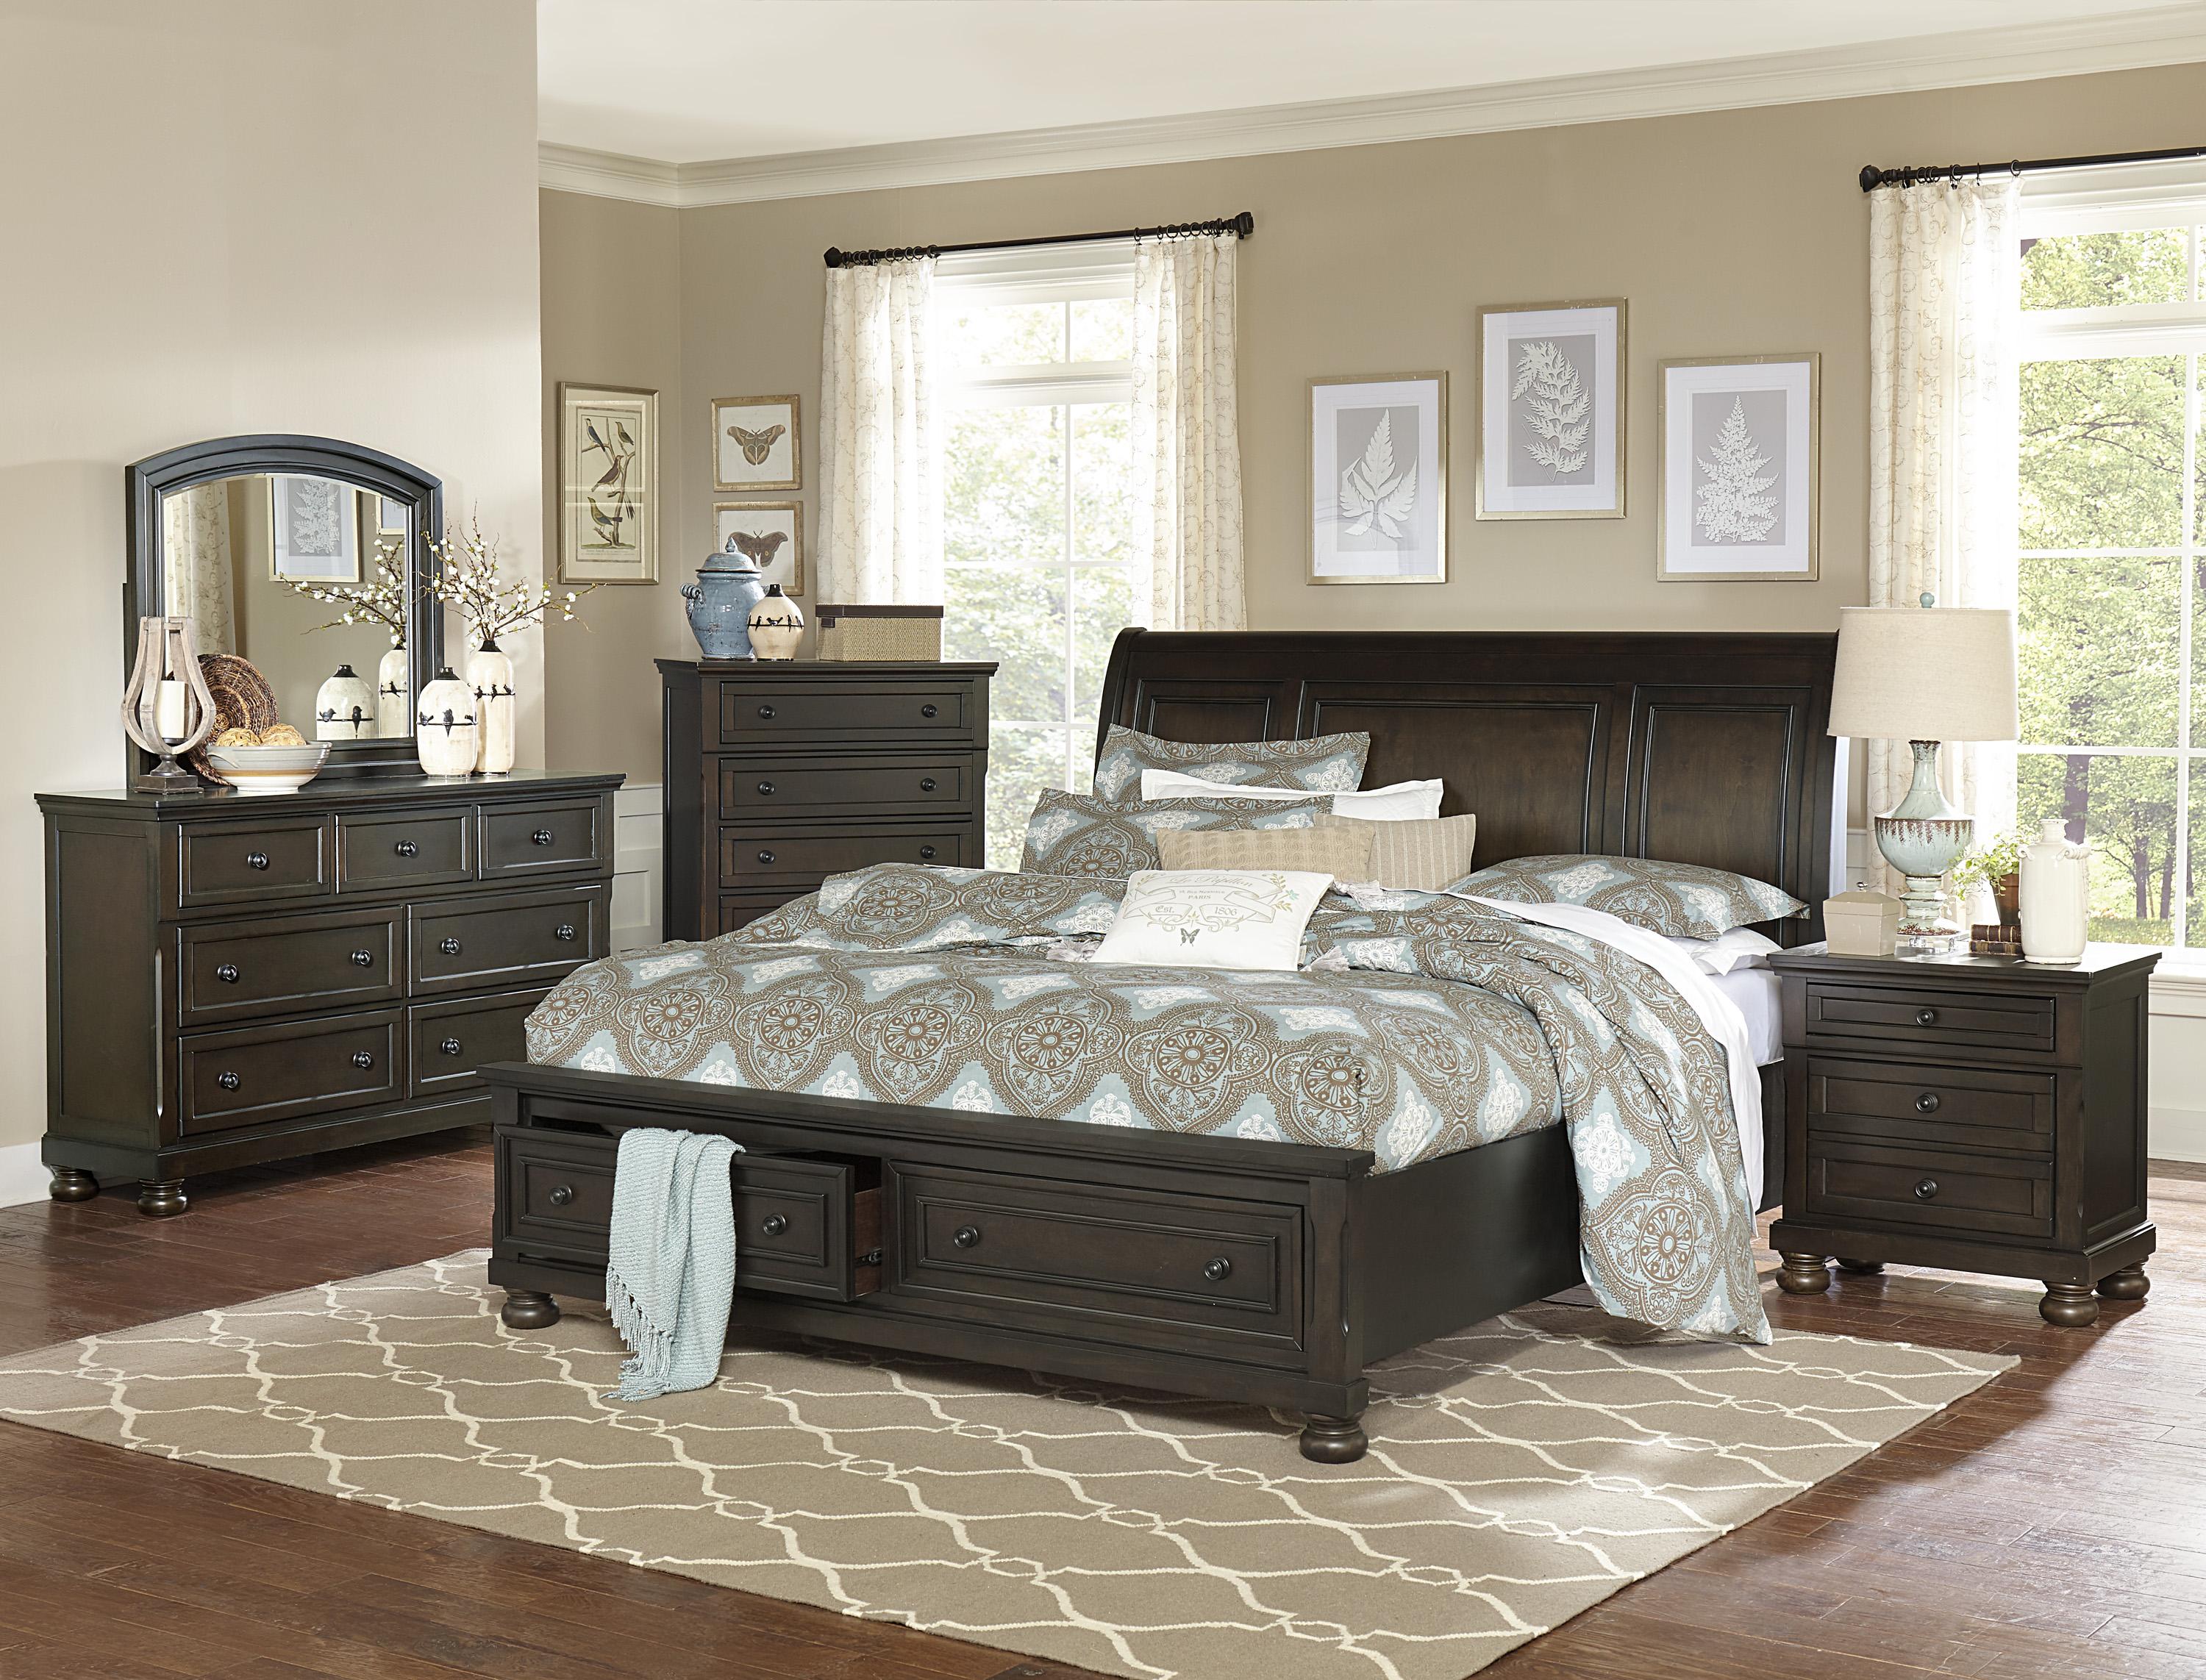 Transitional Bedroom Set 1718KGY-1CK-5PC Begonia 1718KGY-1CK-5PC in Grayish Brown 